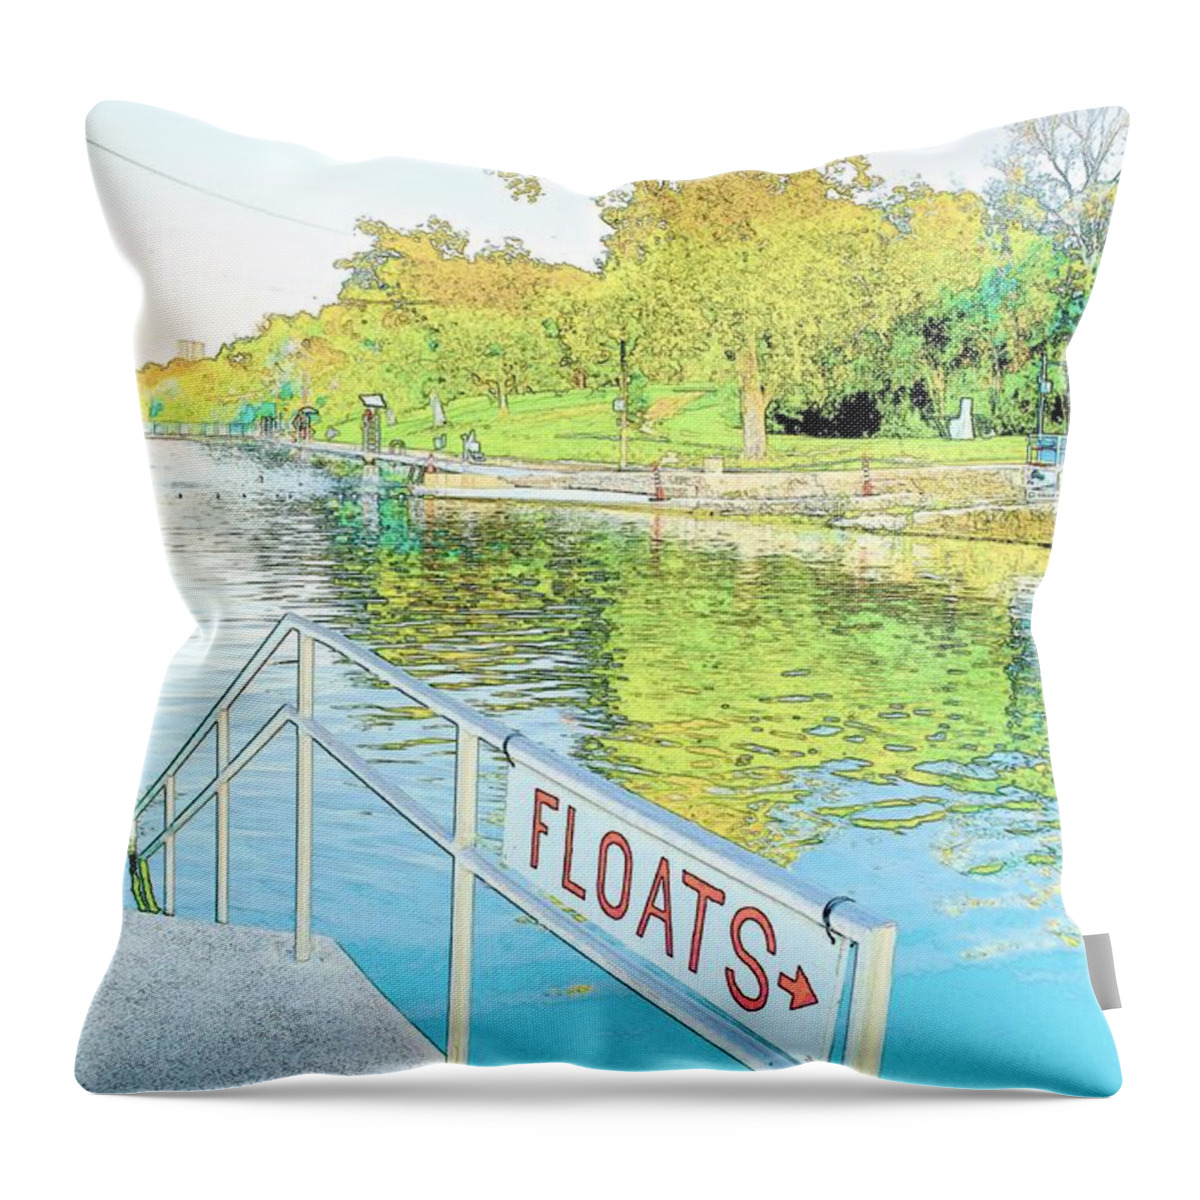 Sketch Throw Pillow featuring the photograph Barton Springs Sketch by Kristina Deane